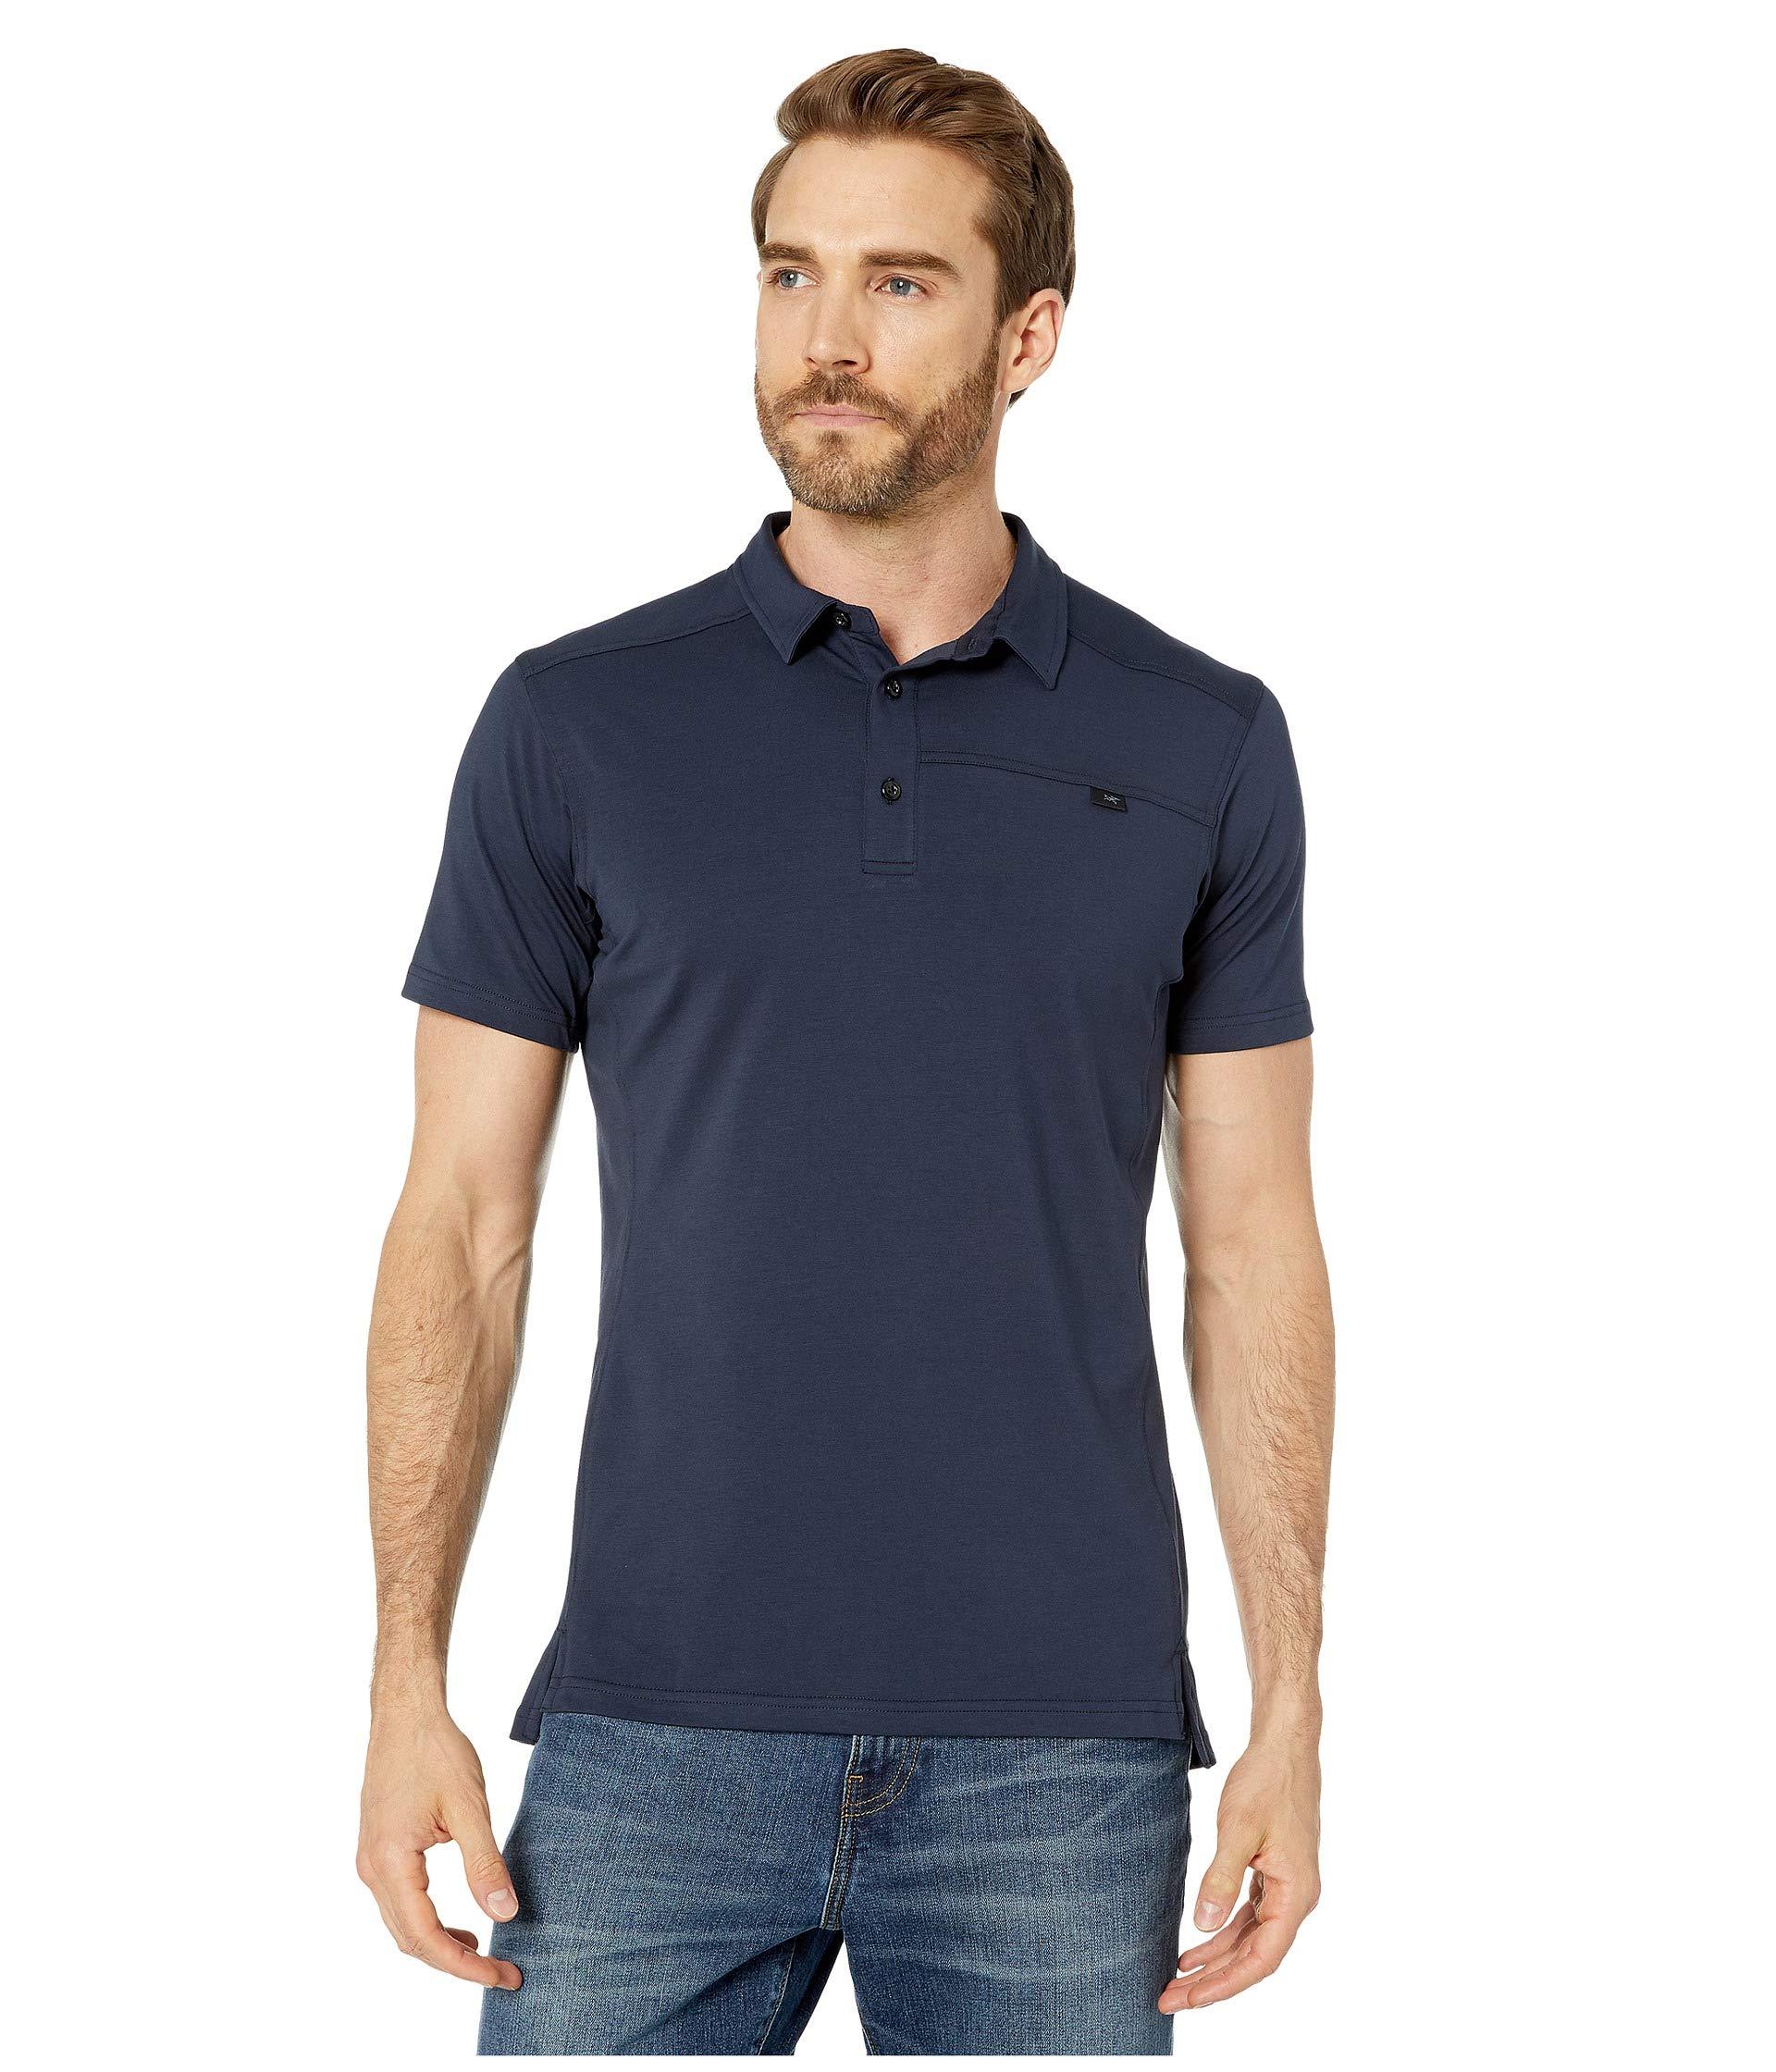 Arc'teryx Cotton Captive Polo S/s in Navy (Blue) for Men - Lyst